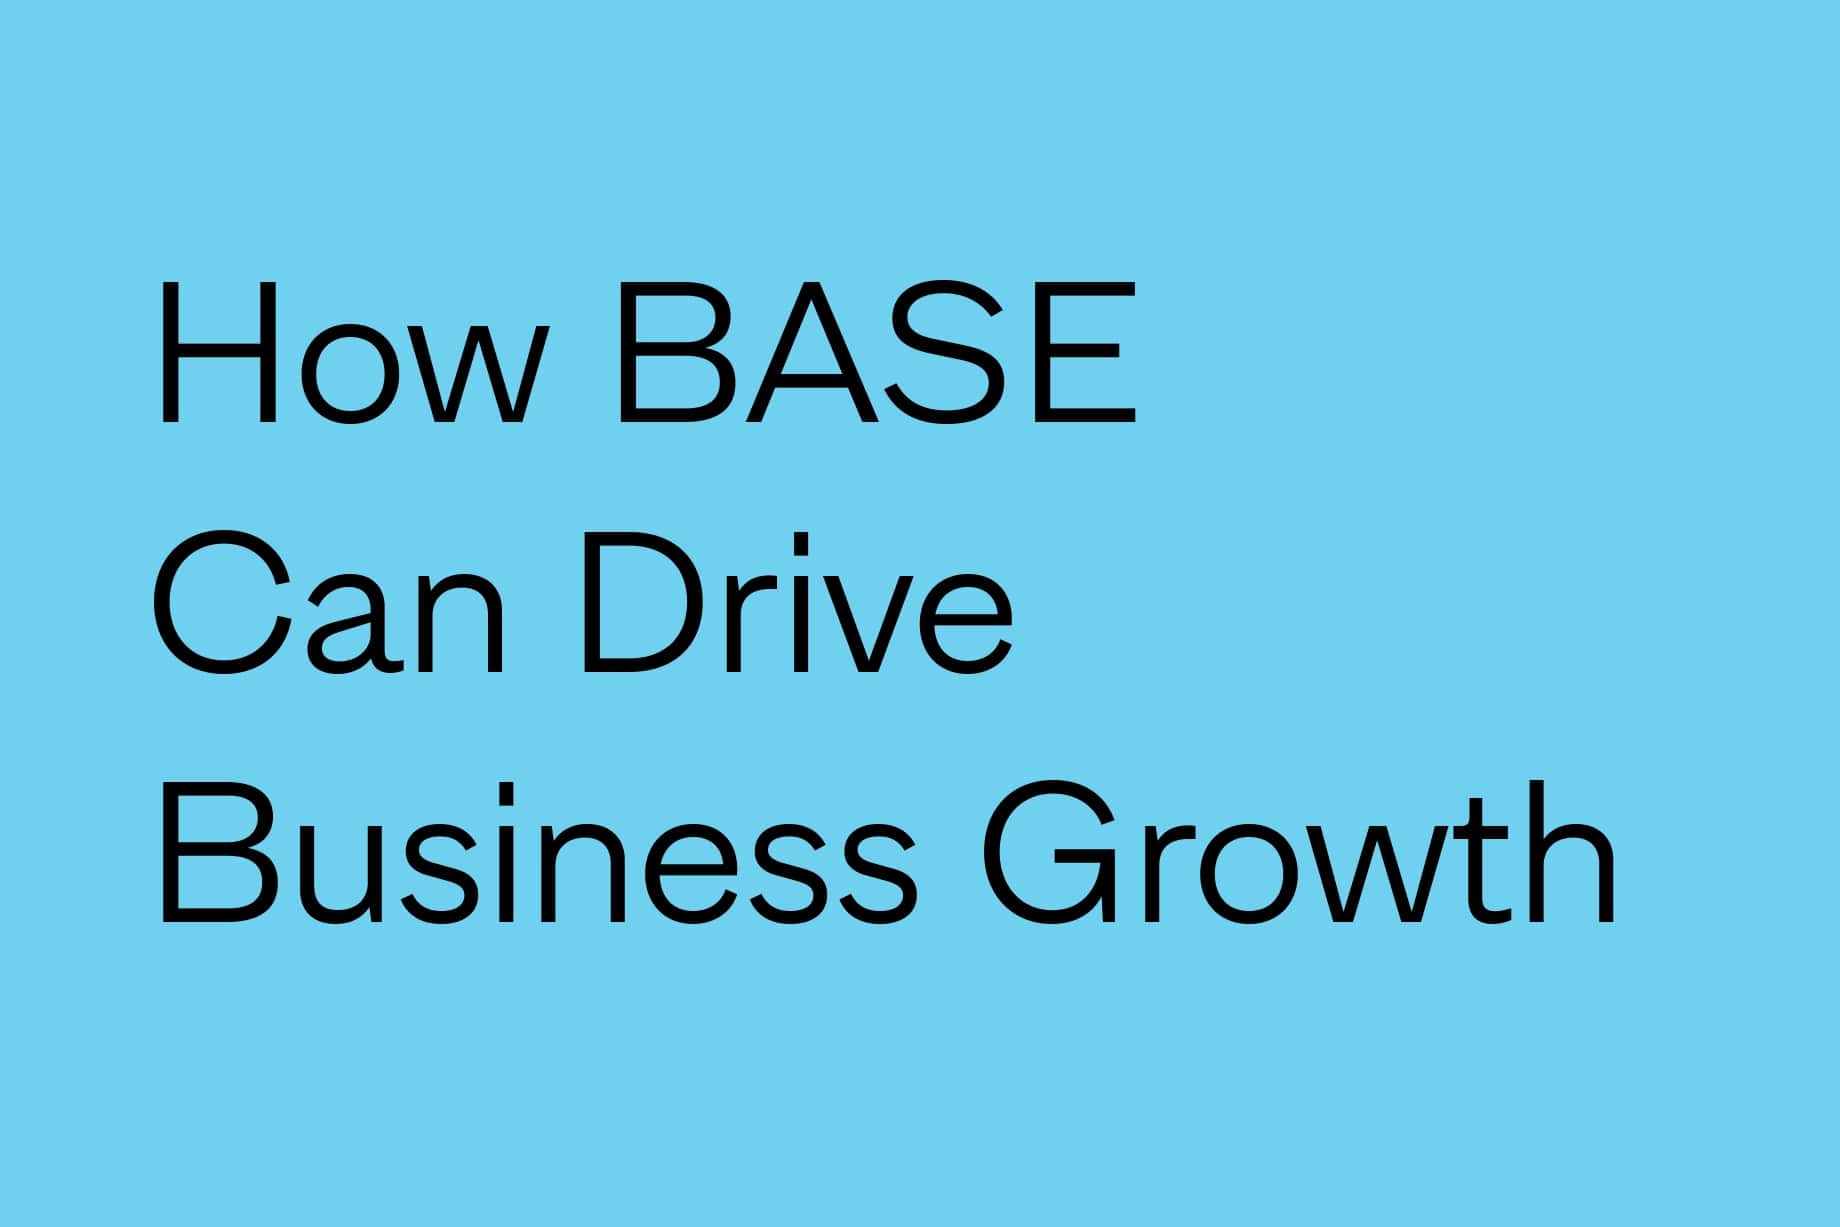 Fundamental Human Needs and Marketing – How BASE Can Drive Business Growth